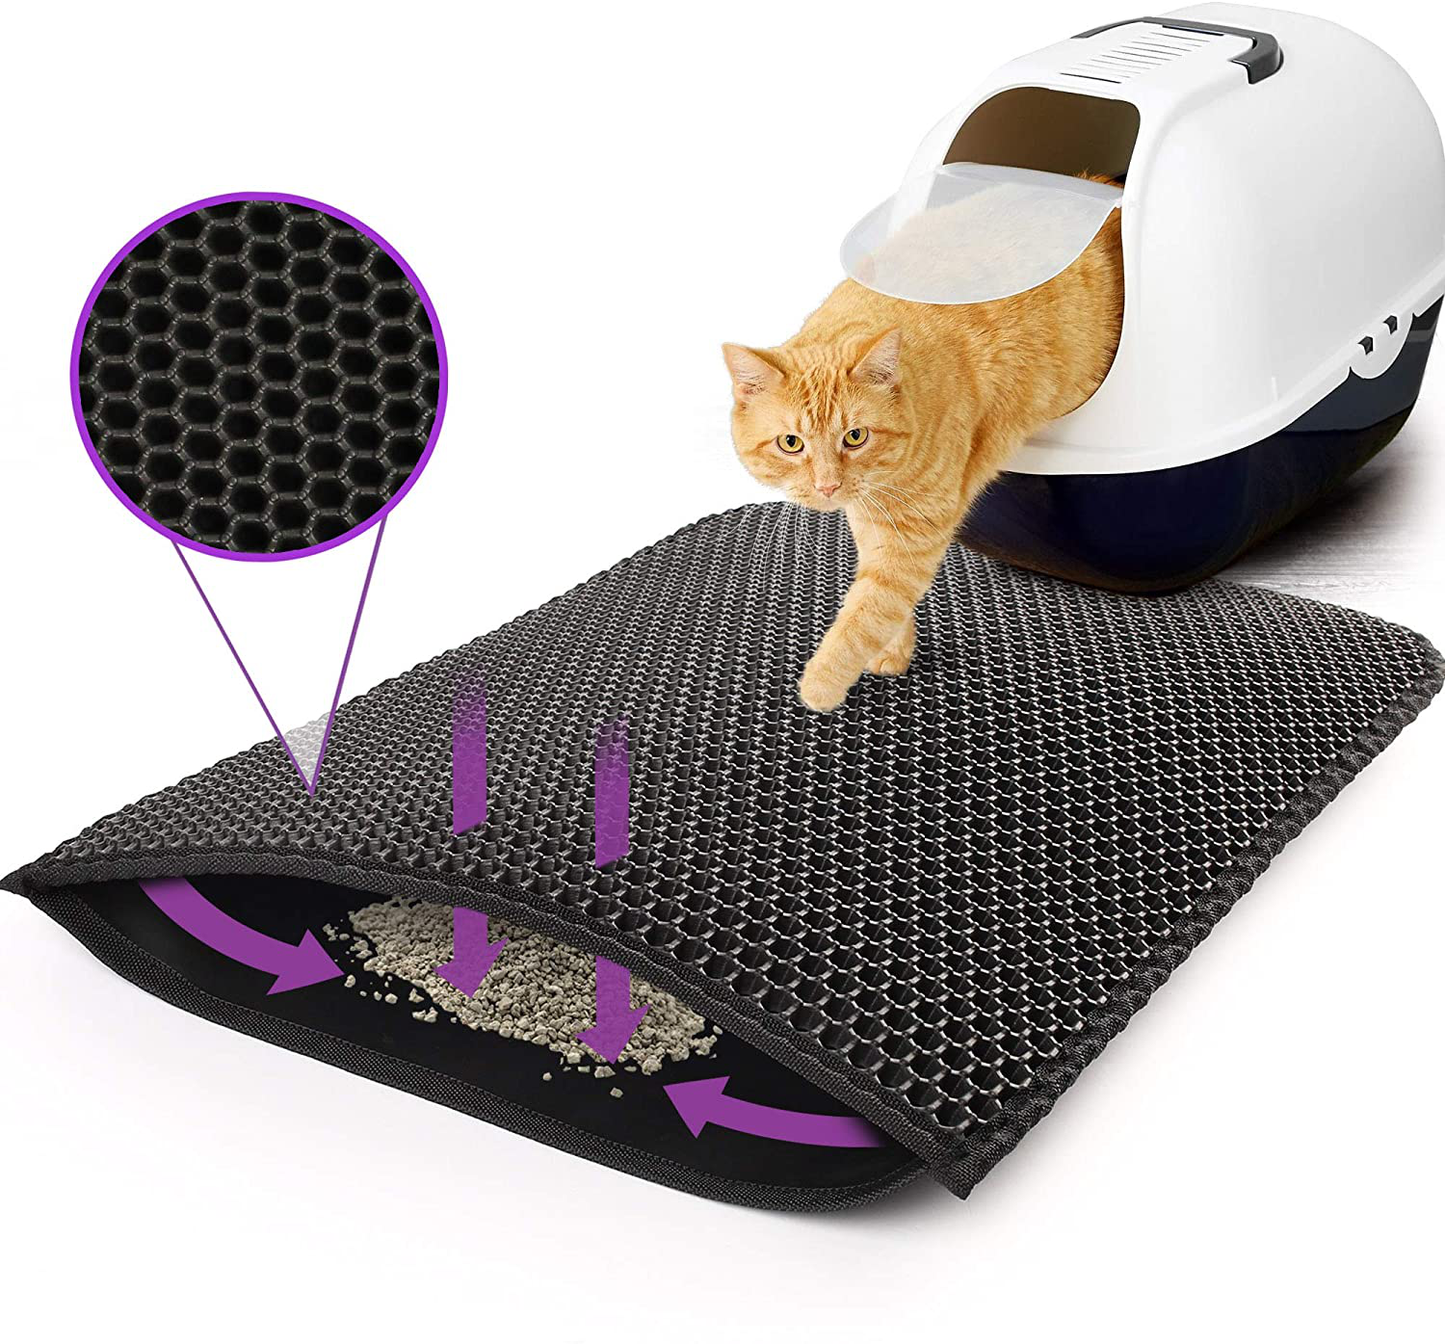 Primepets Cat Litter Mat, Kitty Litter Trapping Pad, Honeycomb Double-Layer Cat Mat for Litter Box, Easy Clean, Large Size, Black Litter Trapper Catcher Rug, Waterproof, Urine Proof